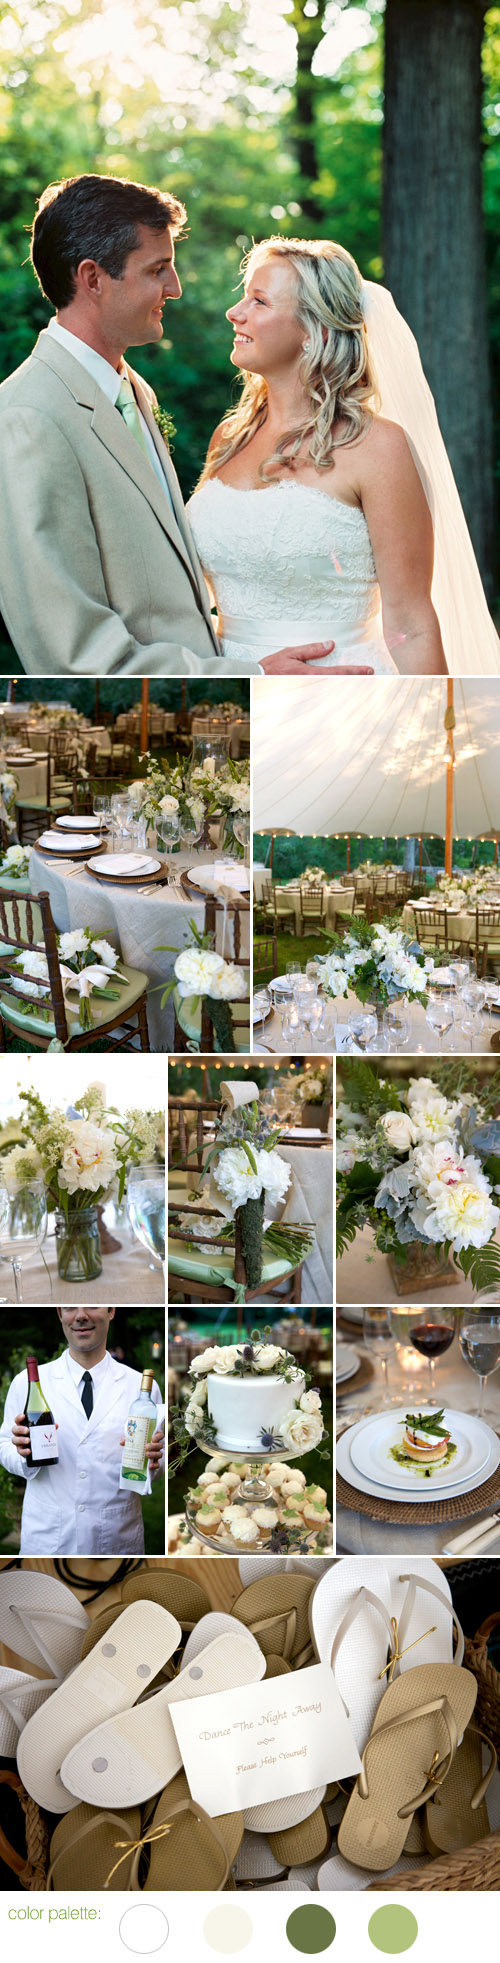 elegant backyard wedding in New Canaan, Connecticut, white, ivory and green wedding color palette, photos by Karen Hill Photography